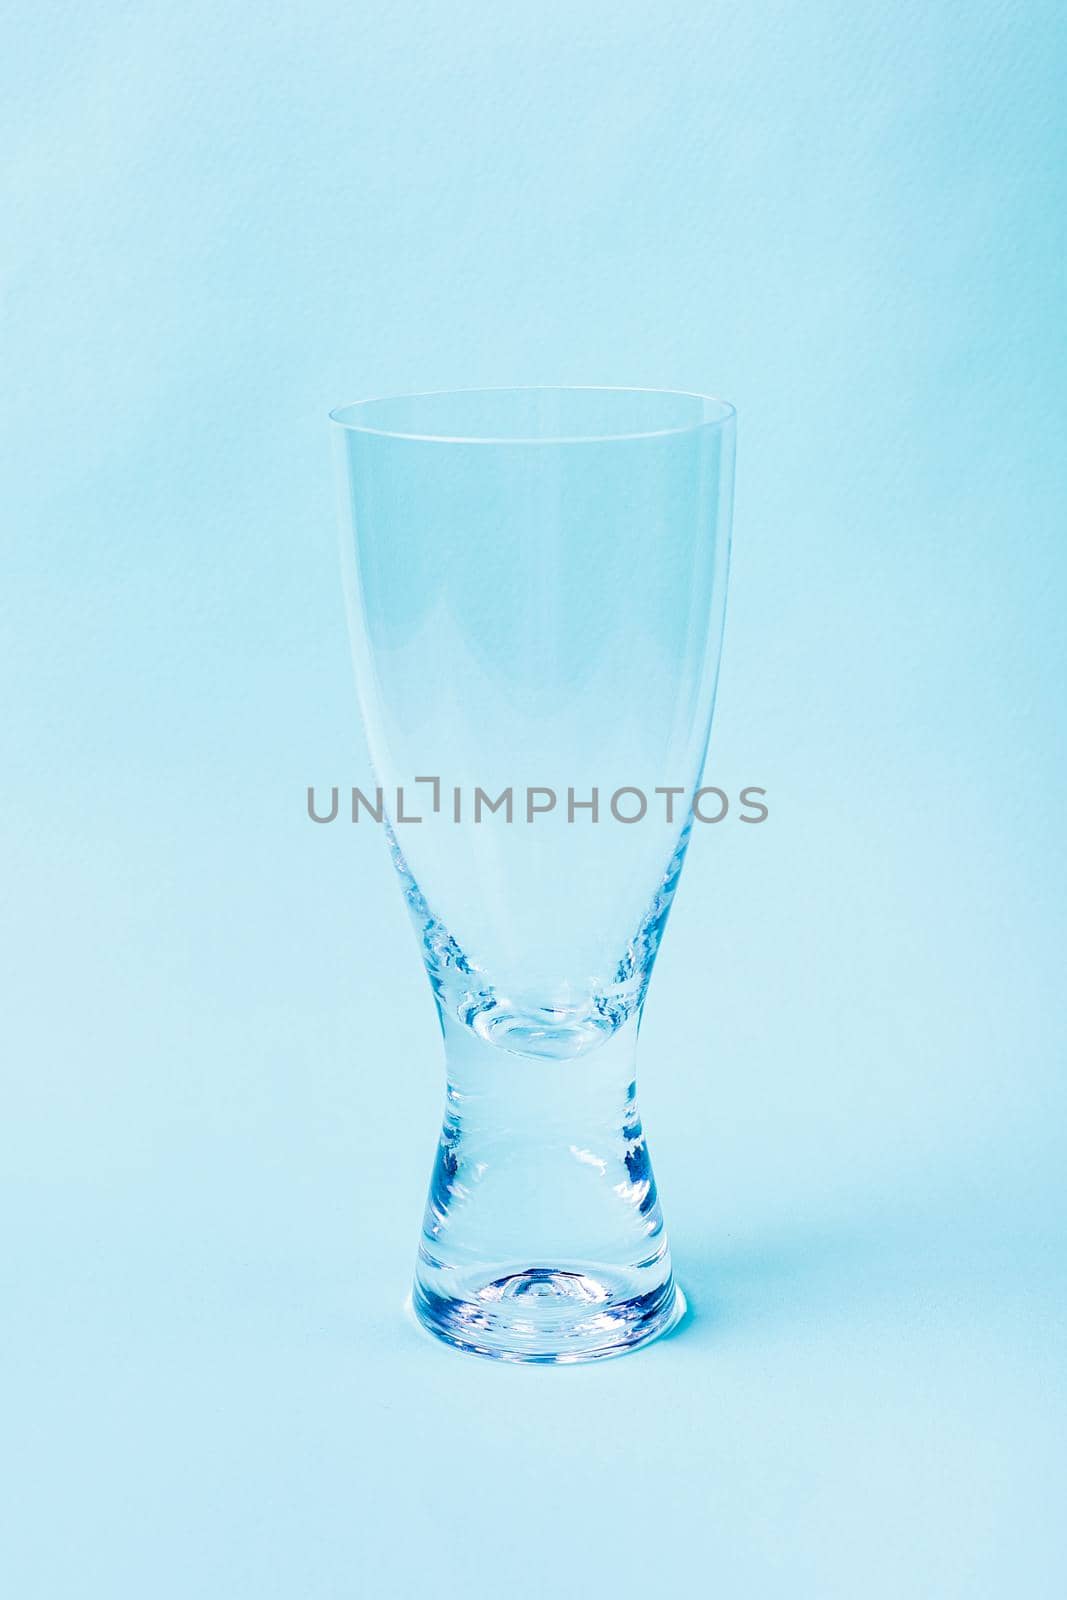 Empty glass from transparent glass on a blue background. by Yurich32